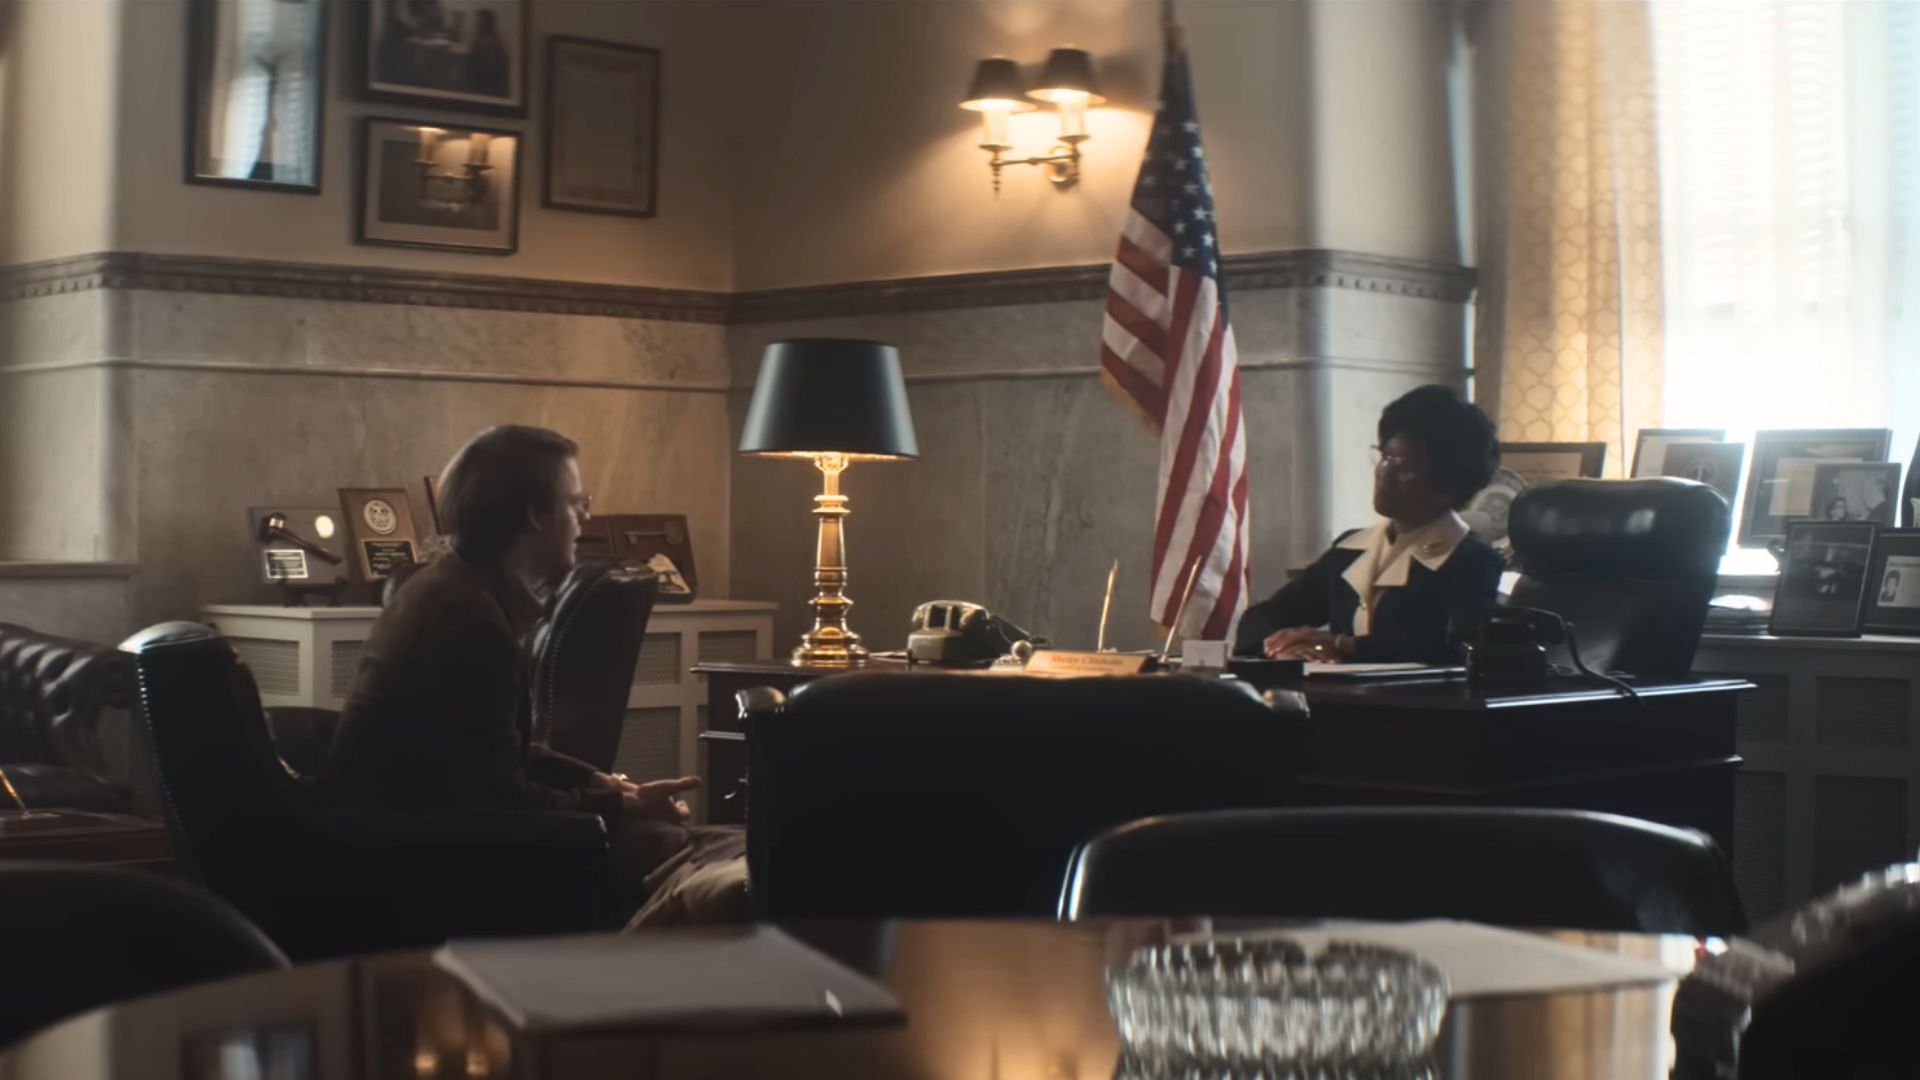 A scene from the movie showing Chisholm&#039;s office (Image via Netflix)